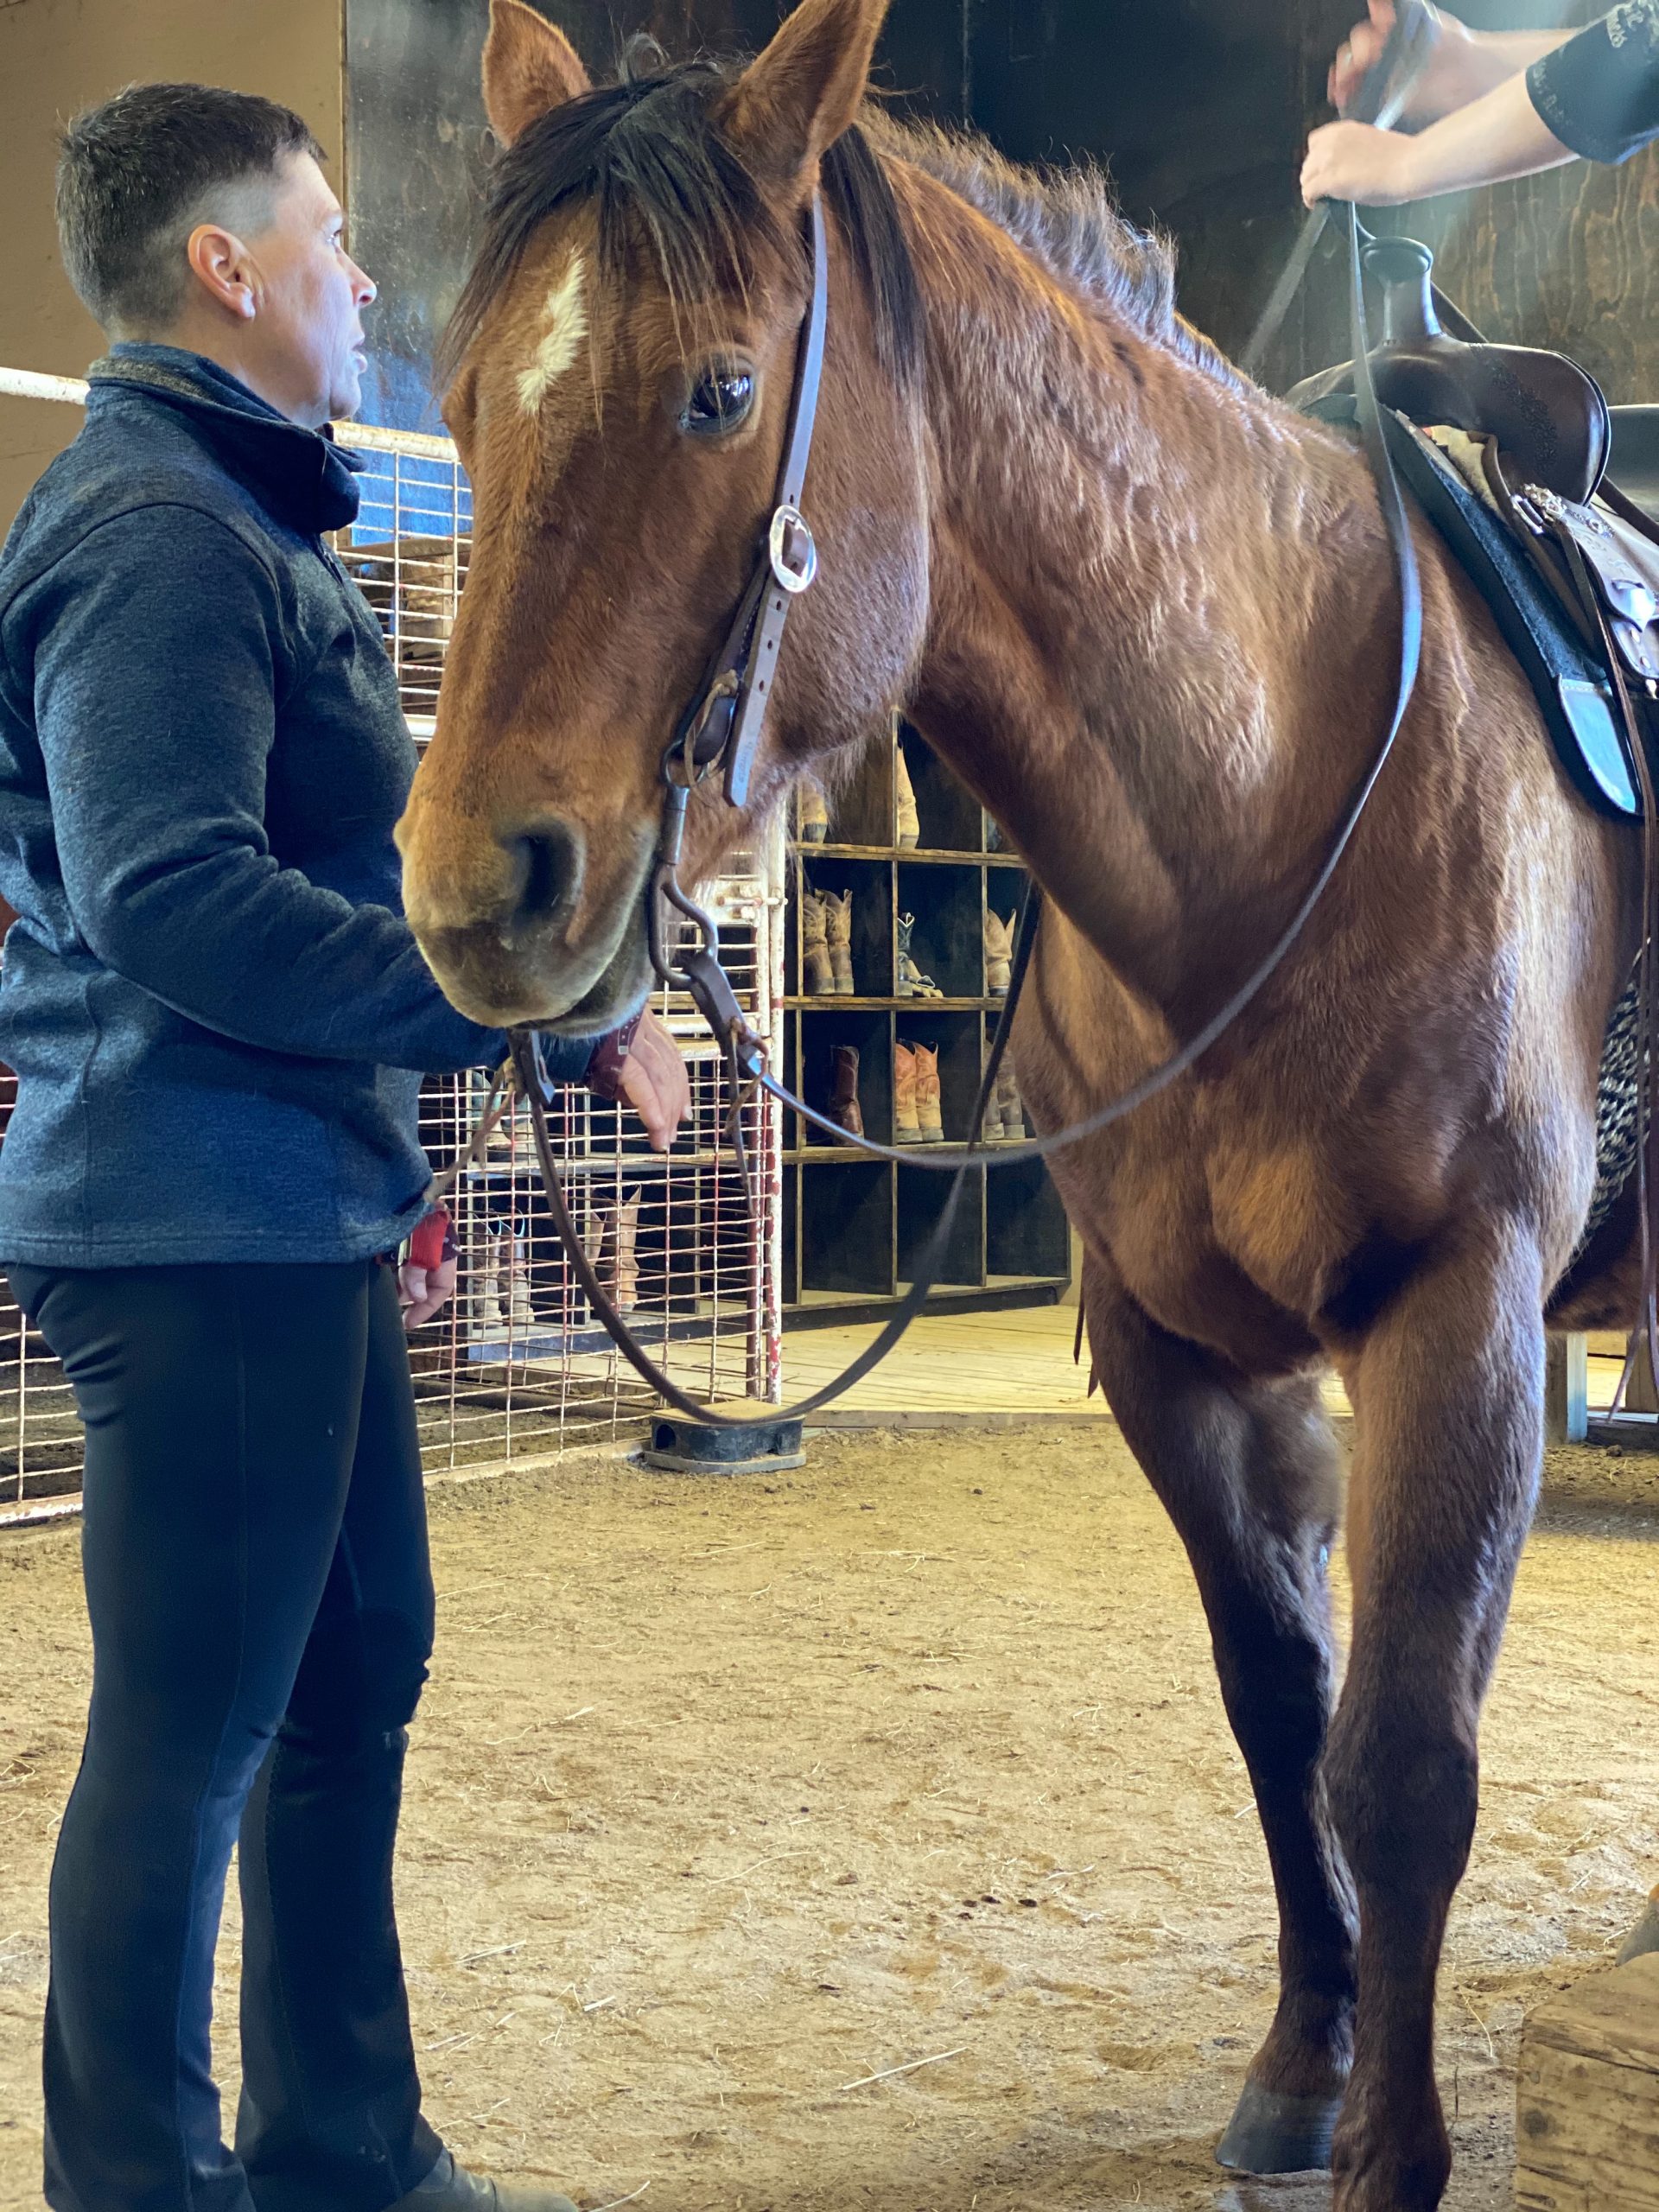 A person is standing beside a brown horse that is saddled and in an indoor area, likely a stable. The person is holding the horse's reins while another person appears to be adjusting the saddle. Horse riding gear and other supplies are visible in the background.